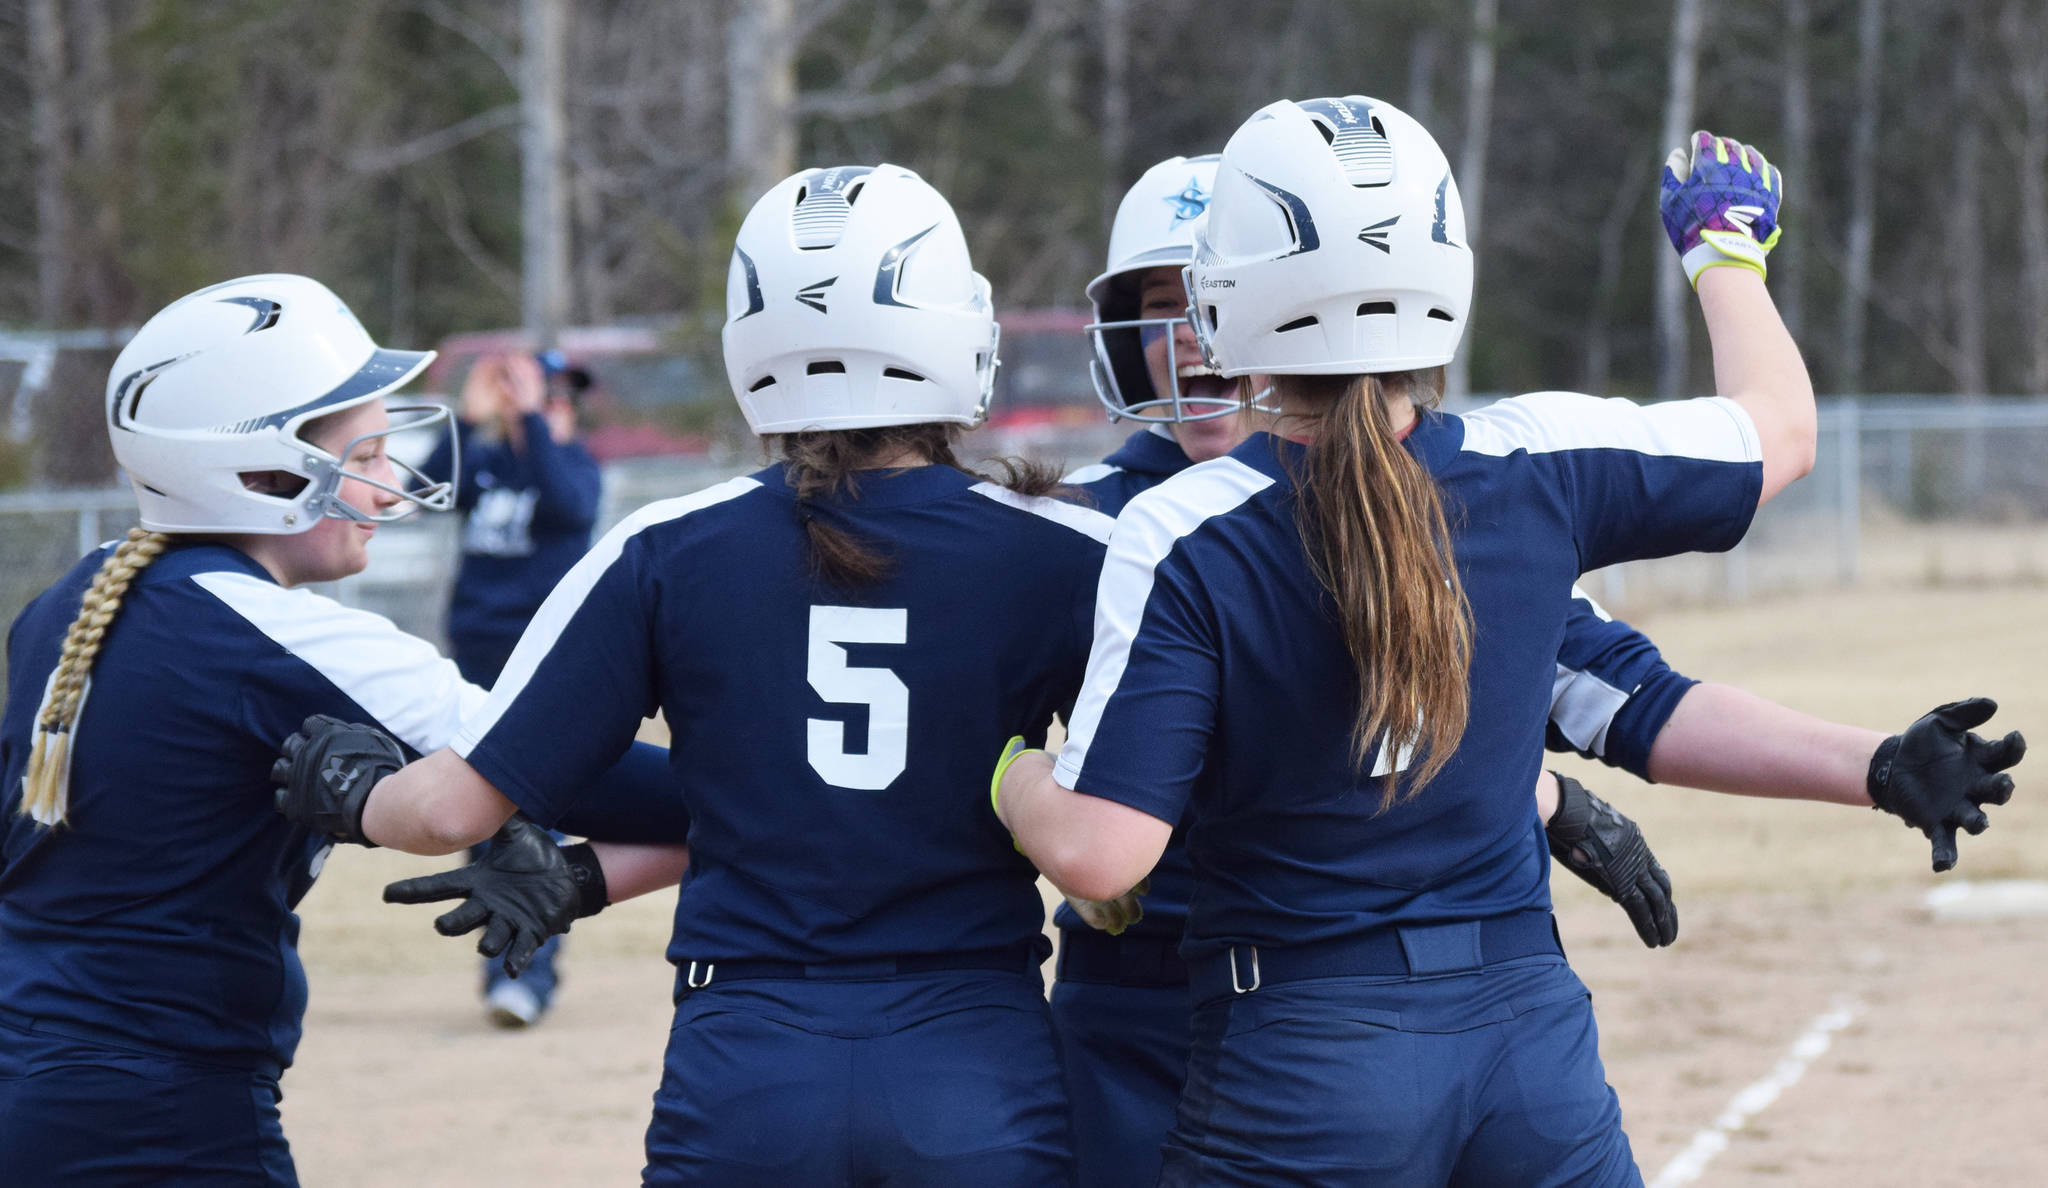 Soldotna’s Bailey Berger (second from right) receives congratulations from teammates after hitting a home run Thursday, April 25, 2019, against Kenai Central at the Soldotna Softball Fields. (Photo by Joey Klecka/Peninsula Clarion)